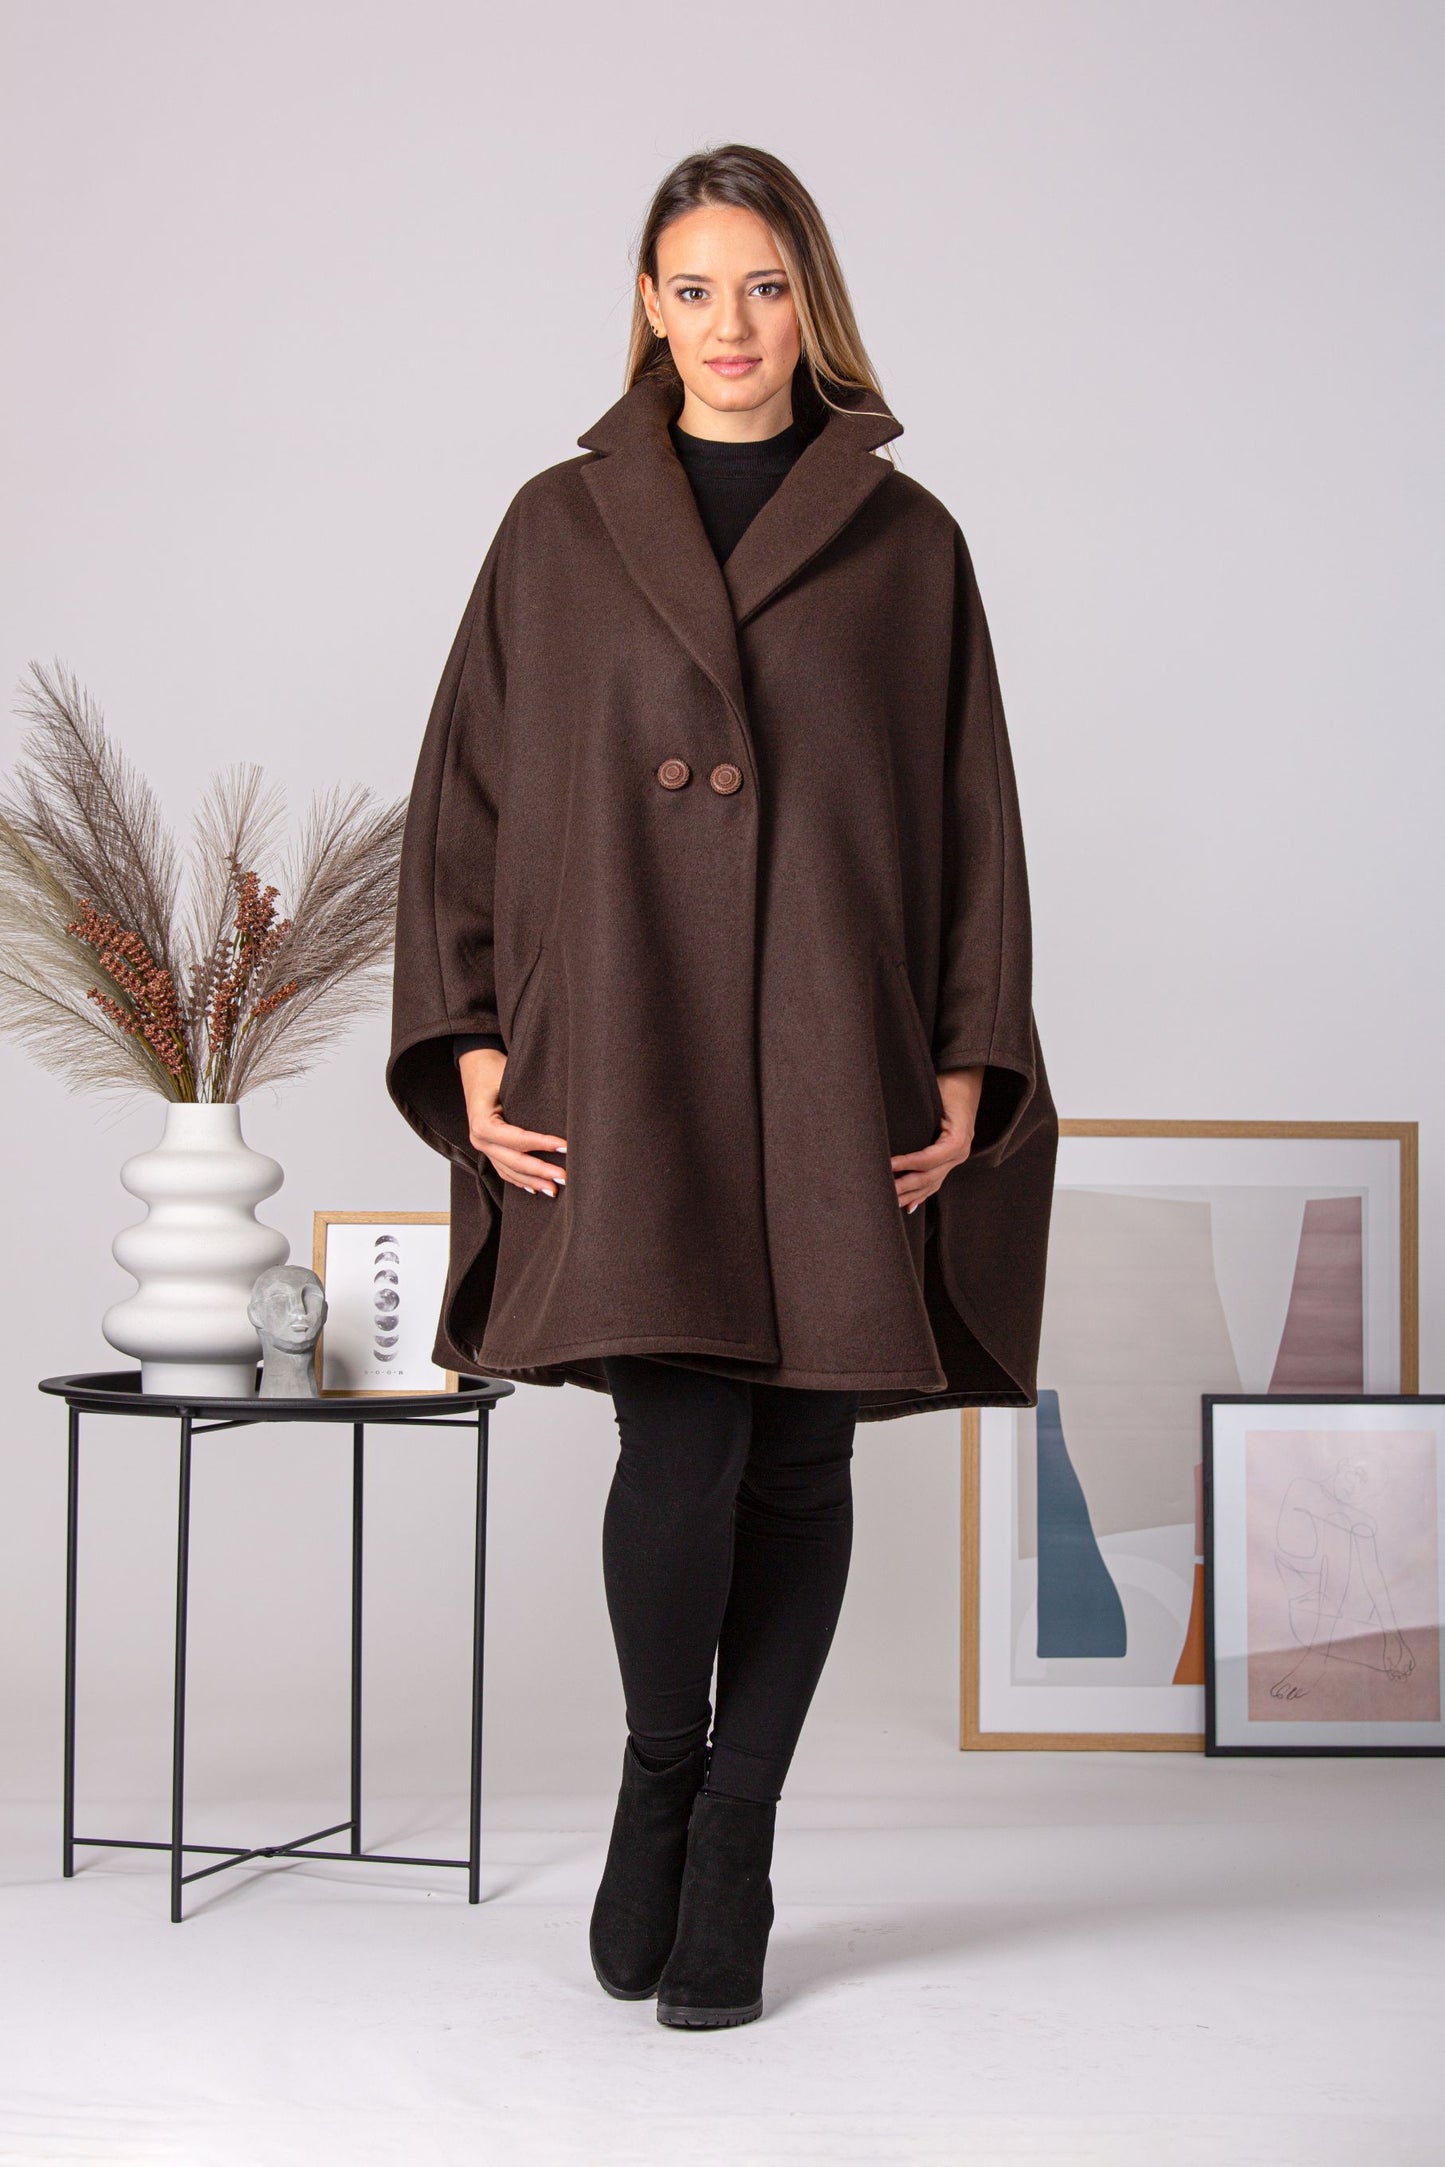 Dark Navy Collared Cape Coat for all occasions - Effortless fashion and easy living from NikkaPlace